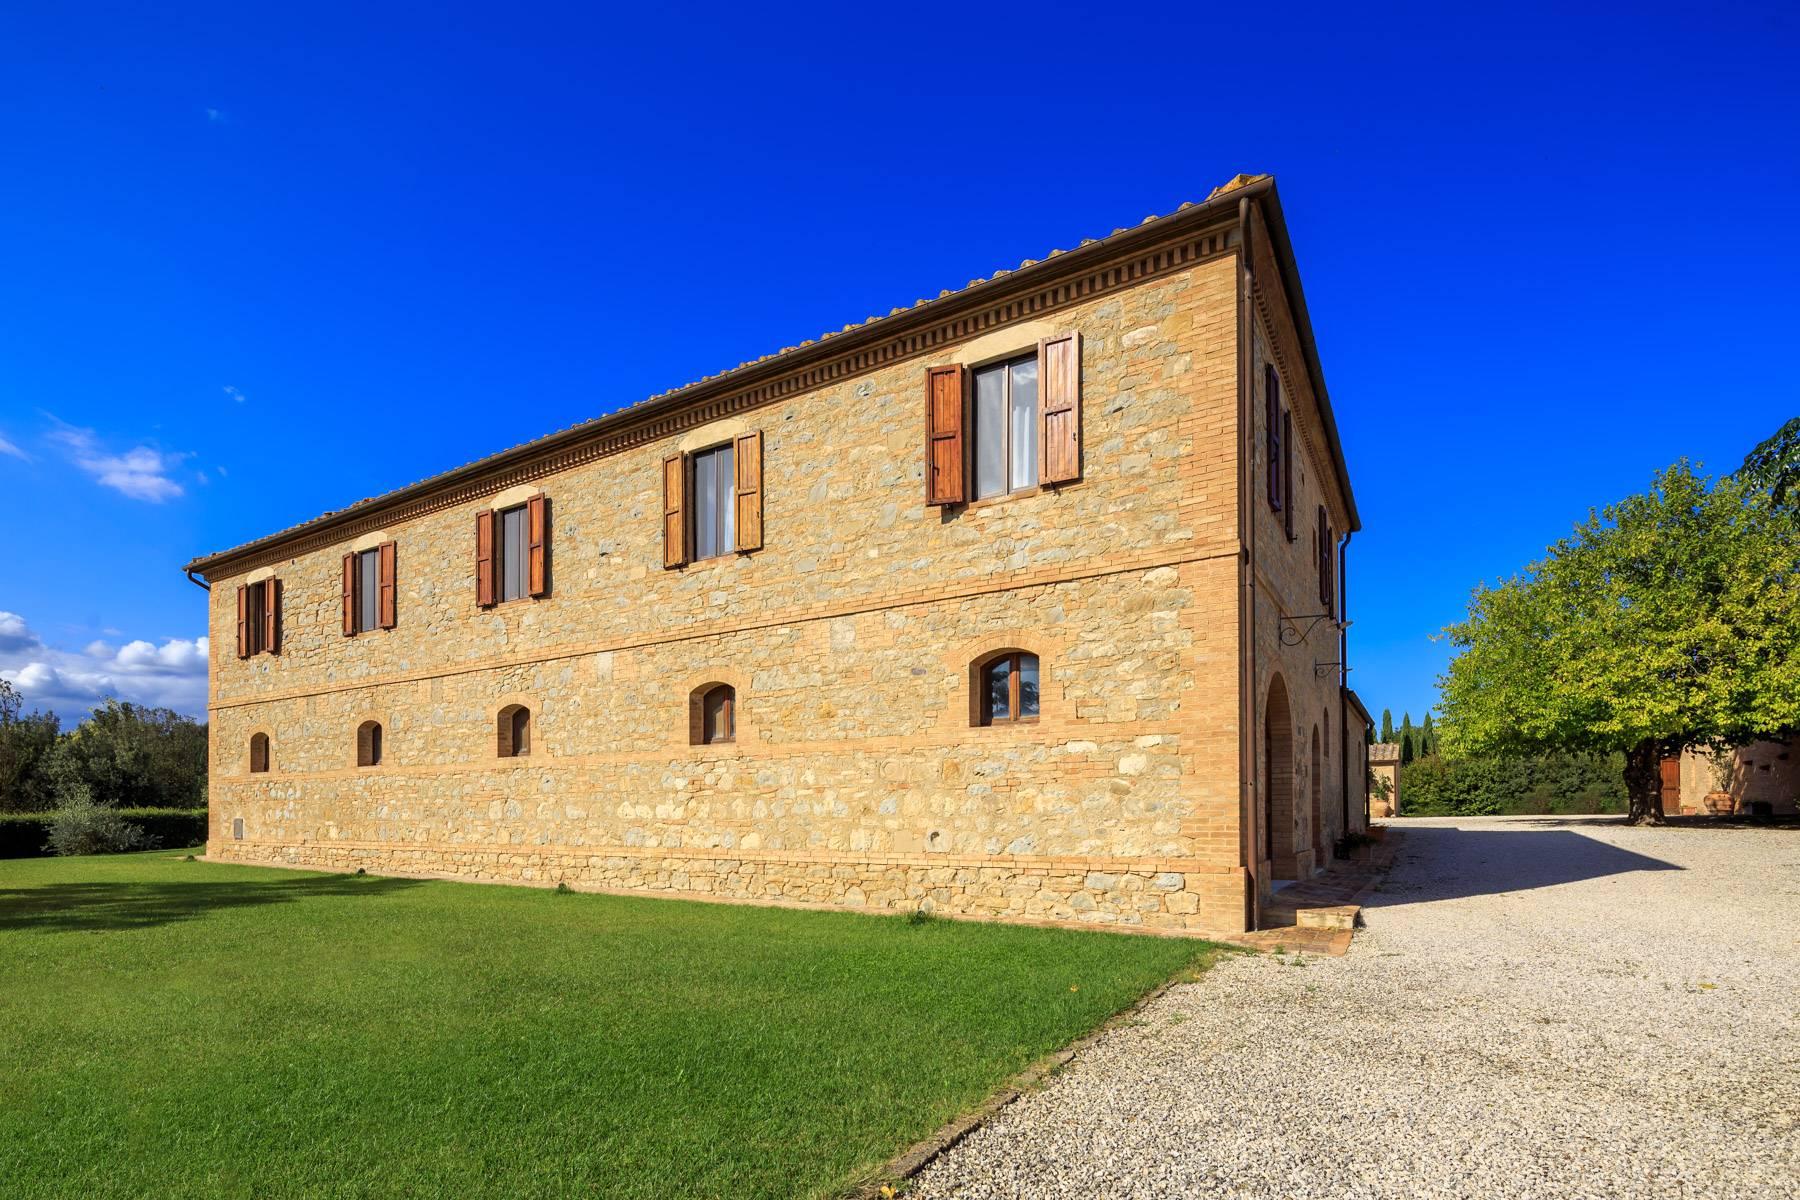 Exclusive property close to Siena - 4